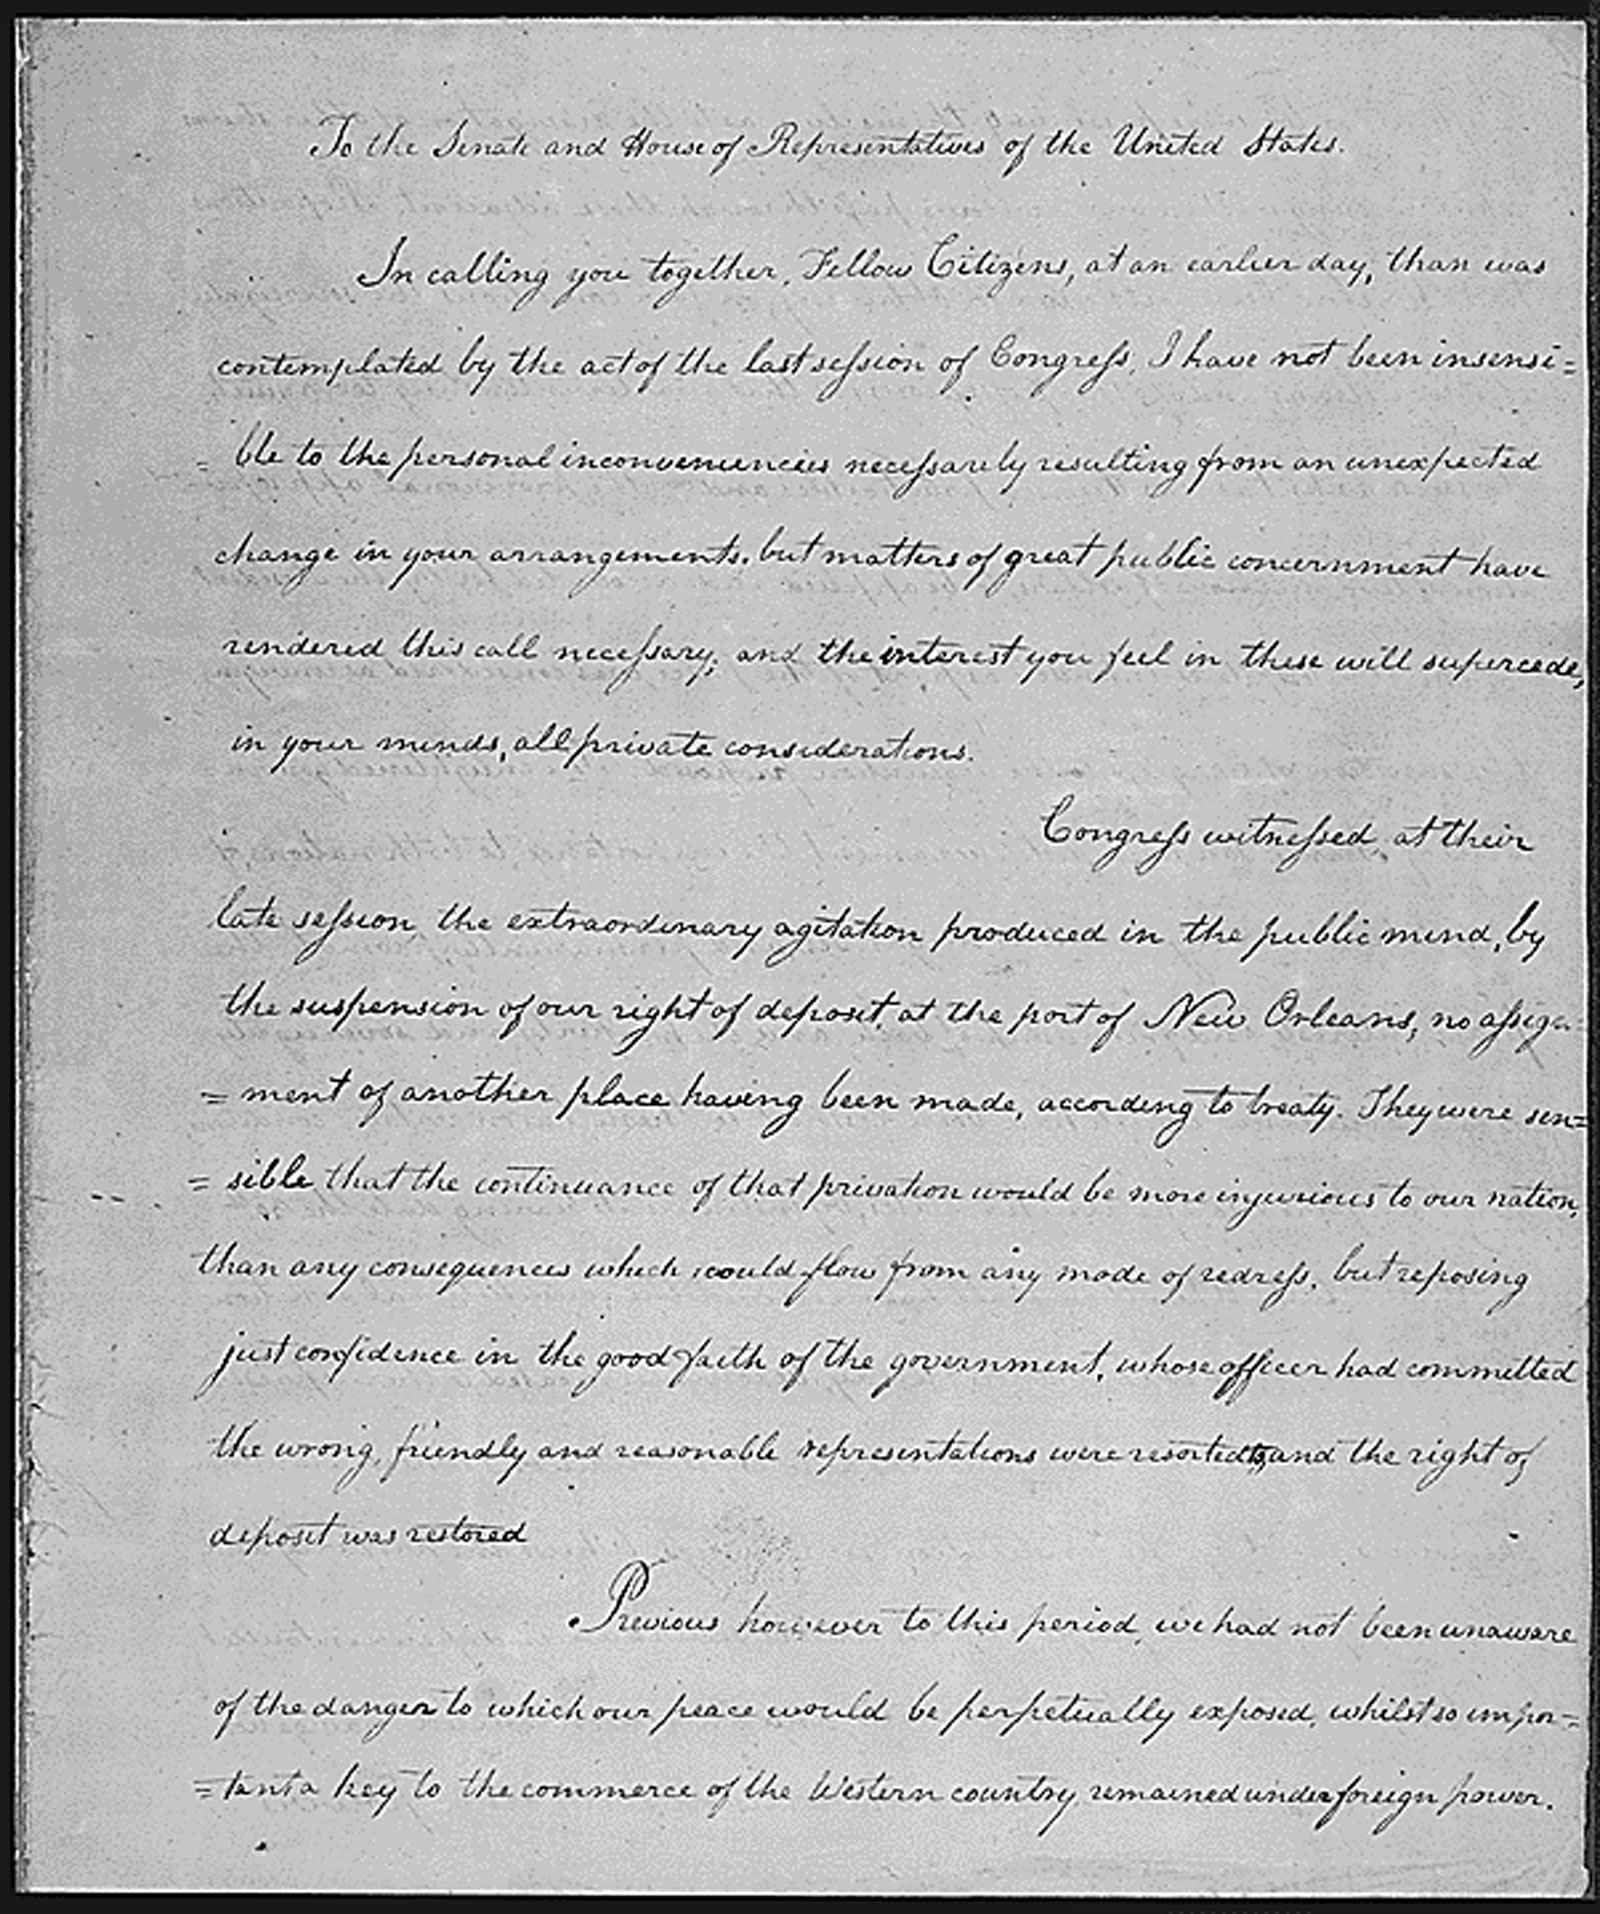 This photo shows the third annual message of President Thomas Jefferson from October 17, 1803.